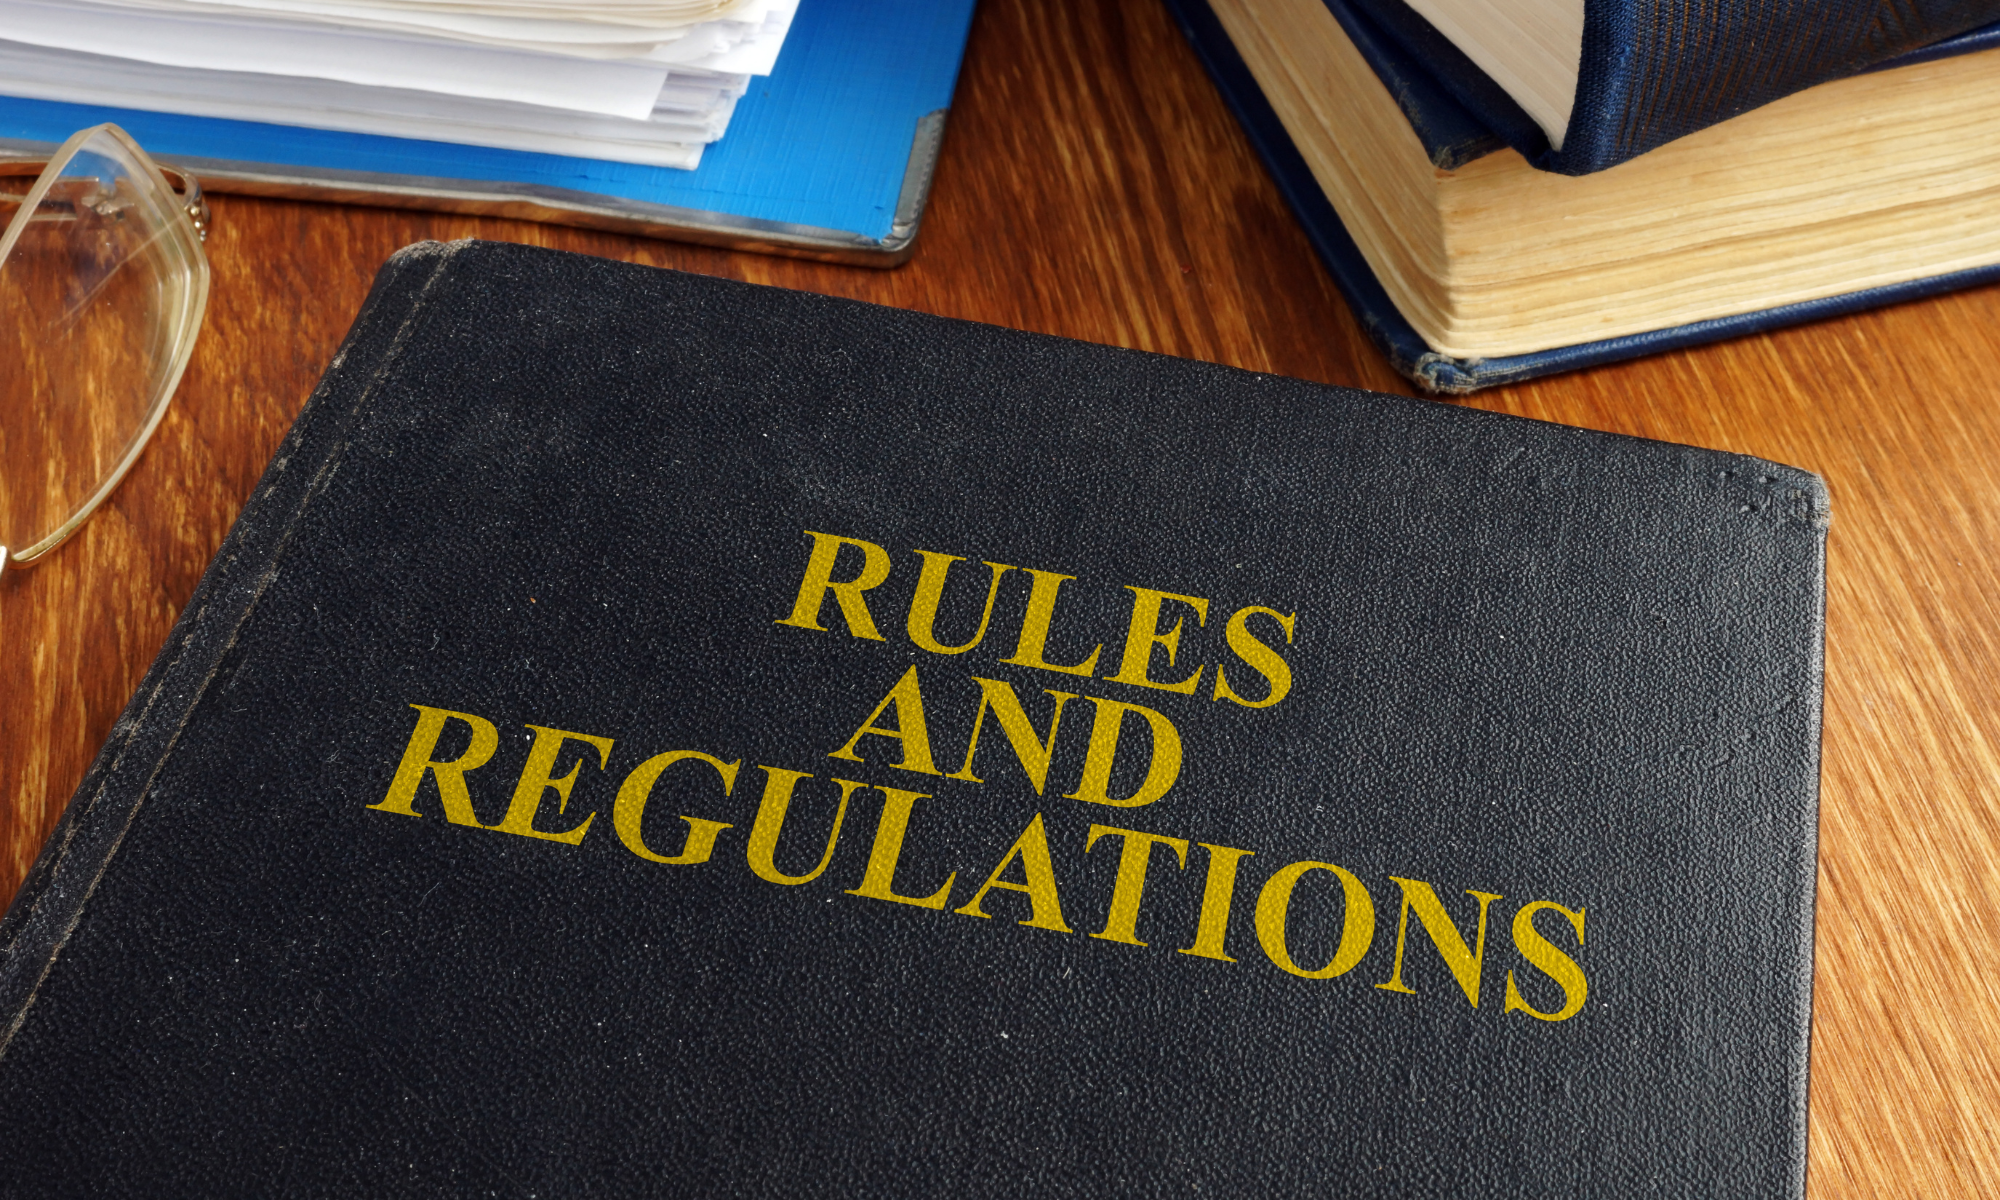 Image of a book containing rules and regulations